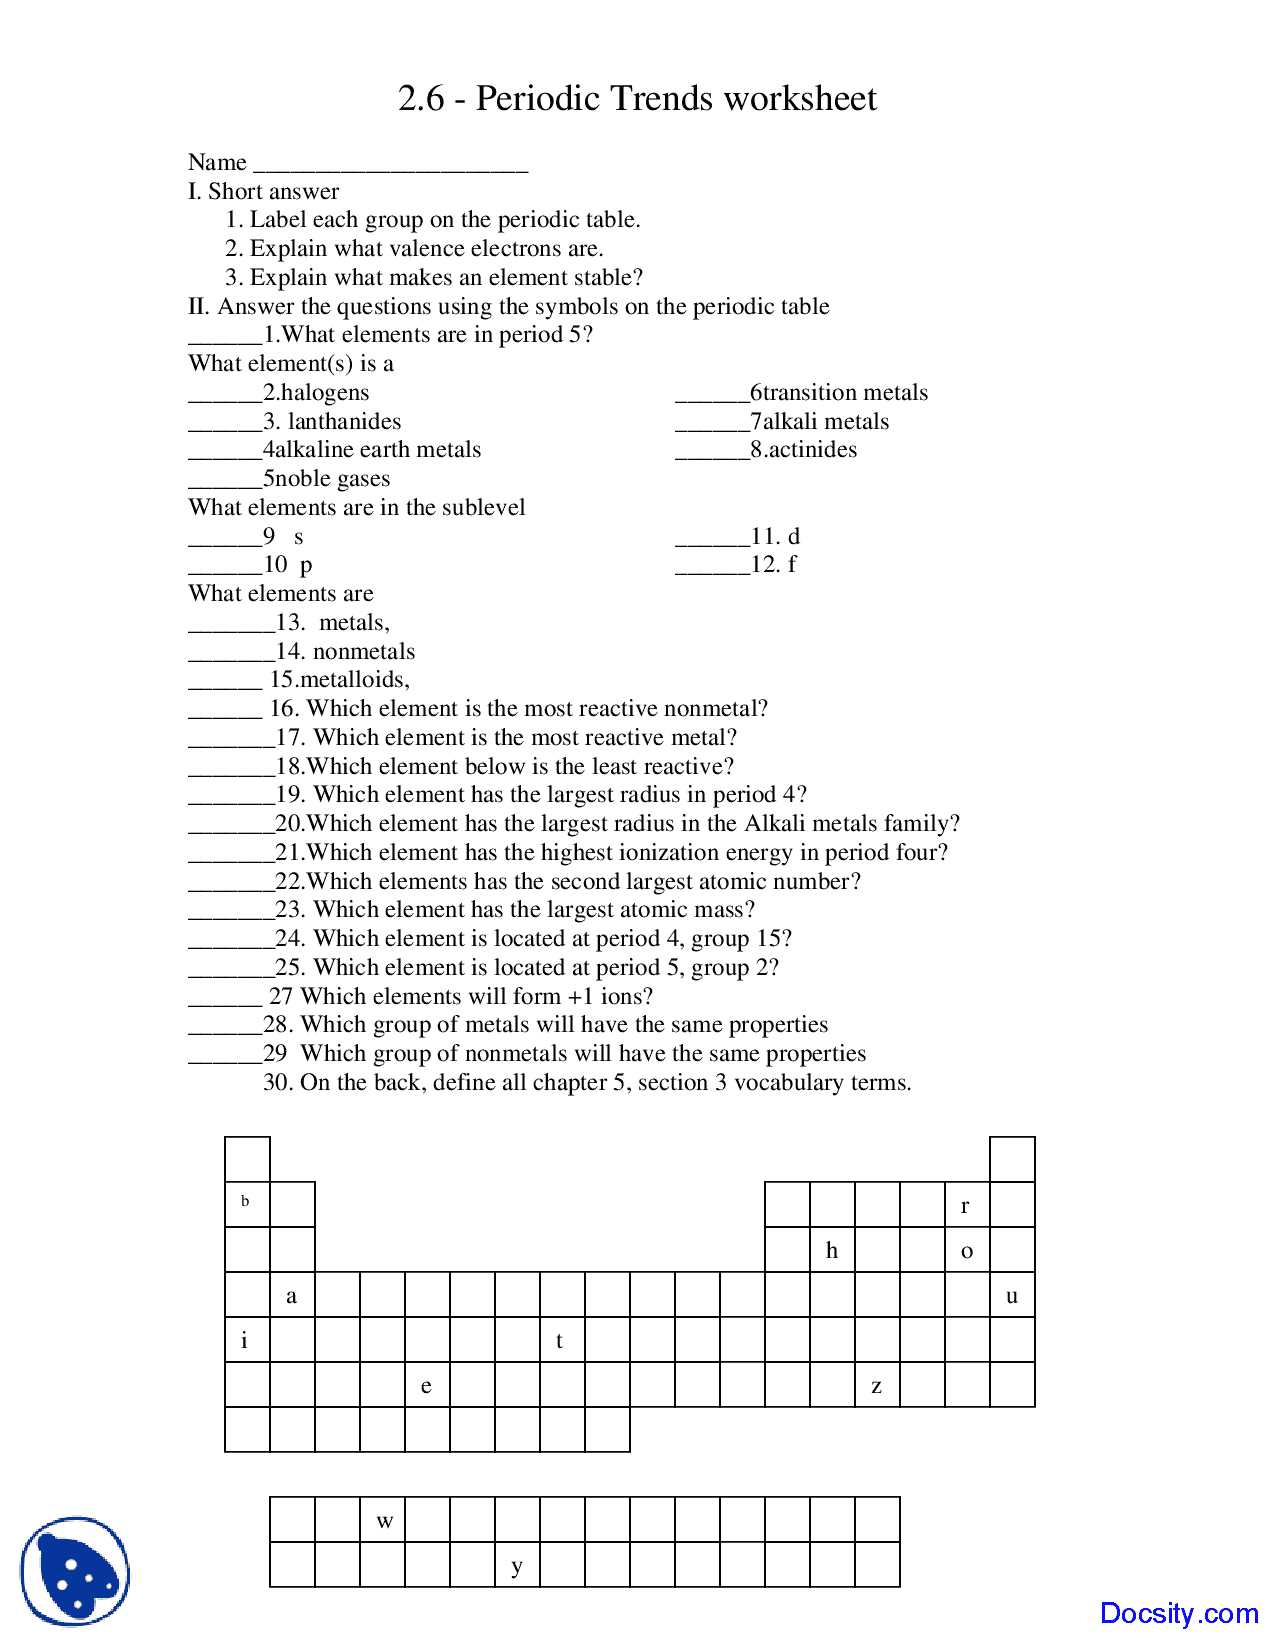 Forces Worksheet 1 Answer Key as Well as Periodic Trends Worksheet General Chemistry Quiz Docsity Answers